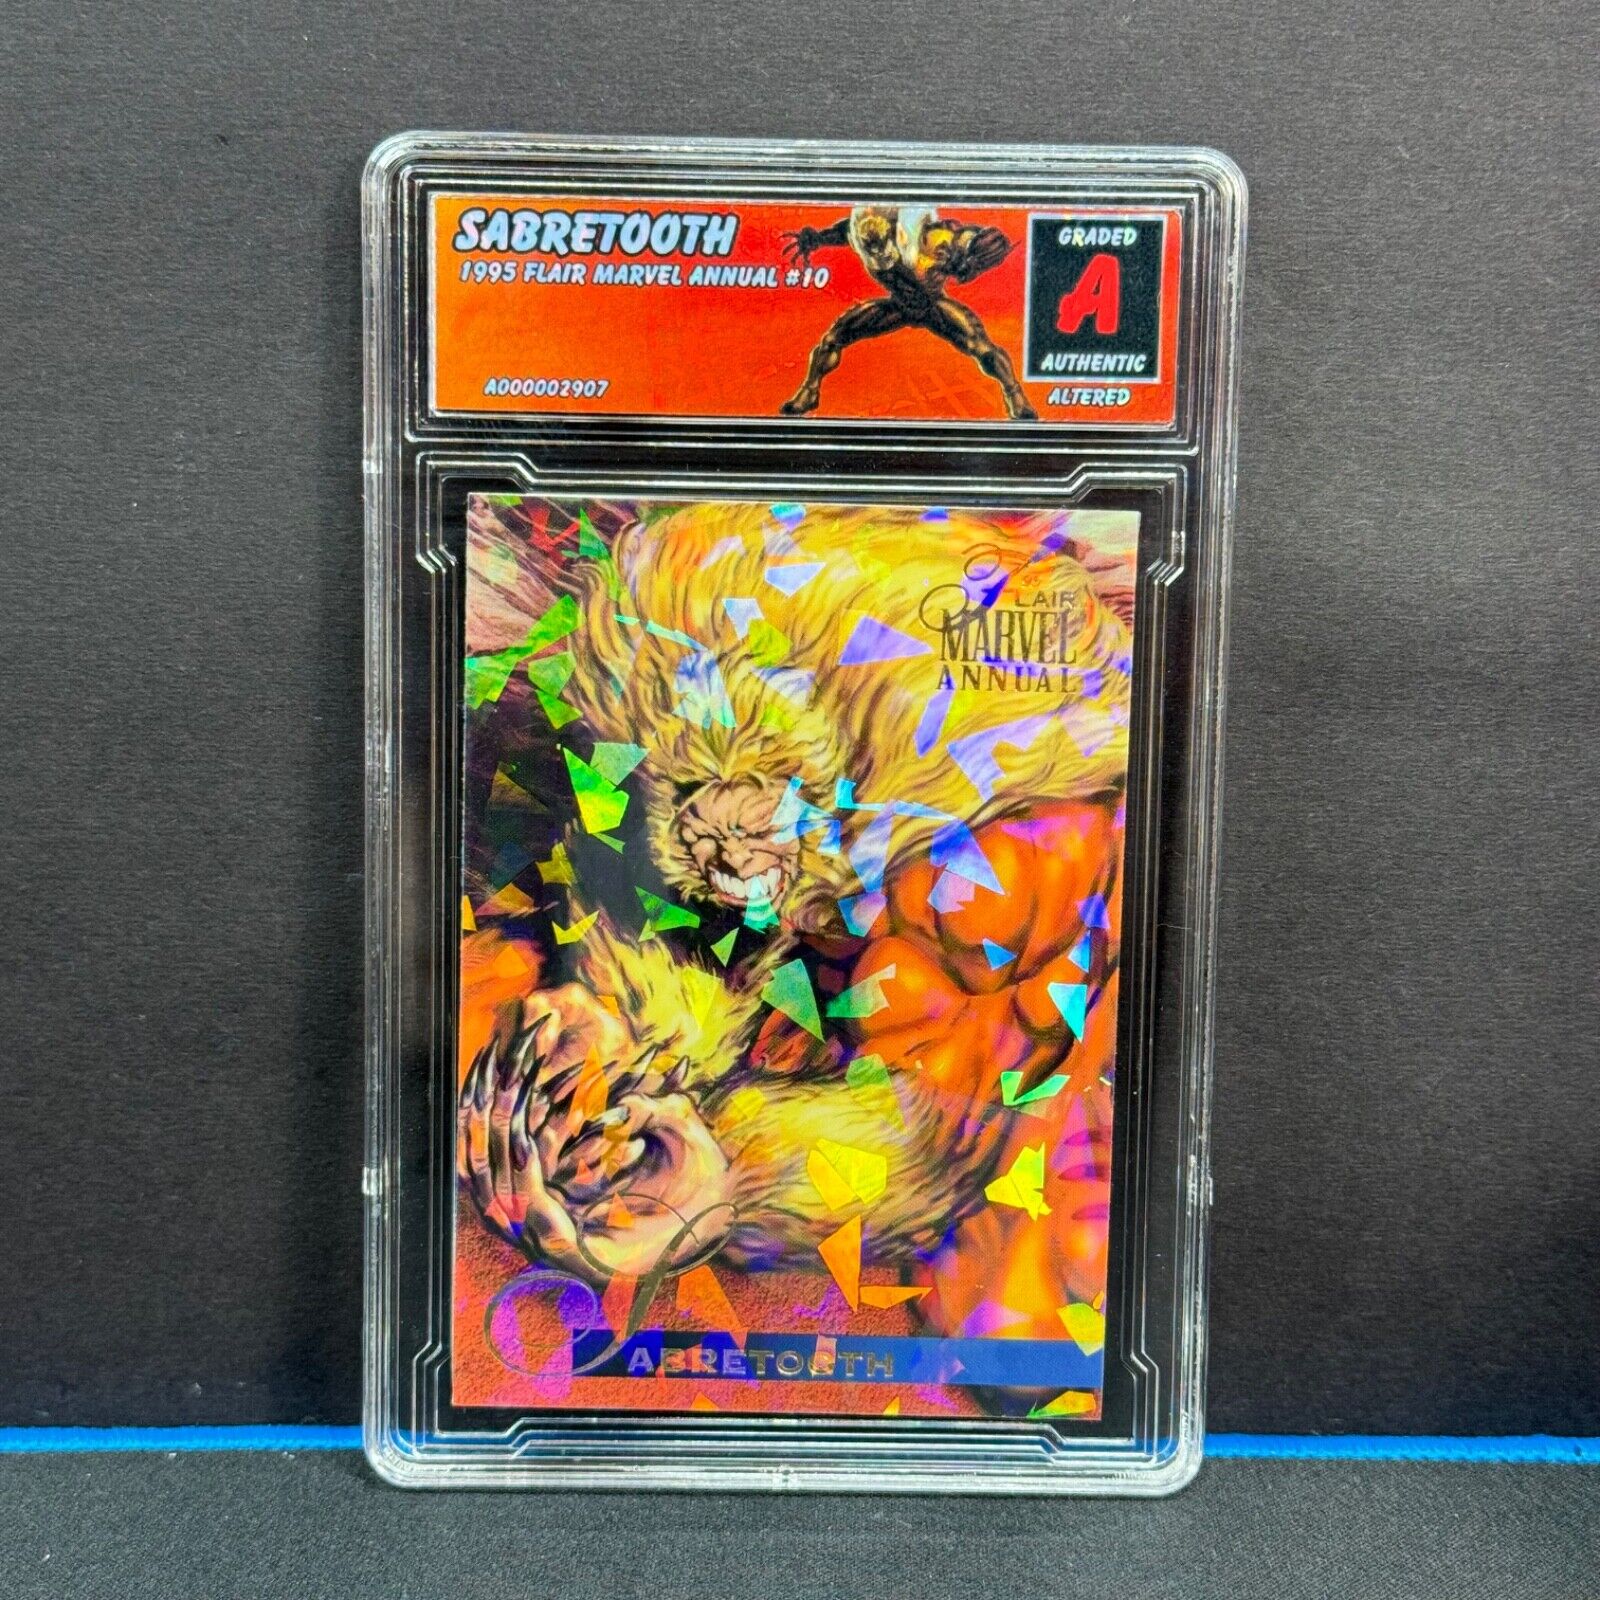 1995 Flair Marvel Annual Sabretooth #10 Altered Cracked Ice Refractor